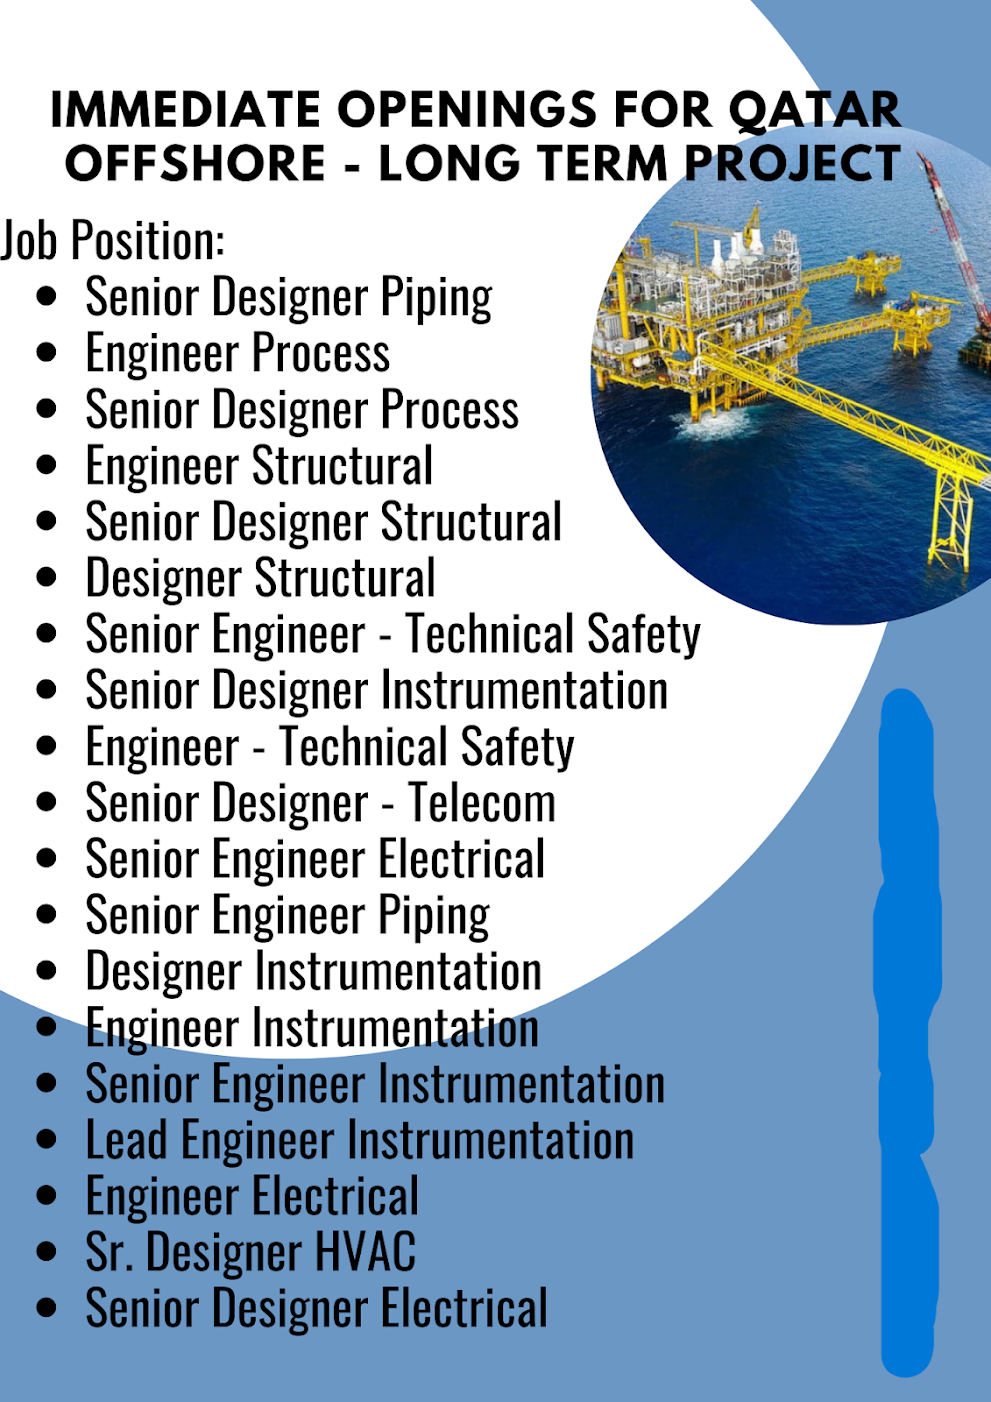 Immediate openings for Qatar Offshore - Long term Project